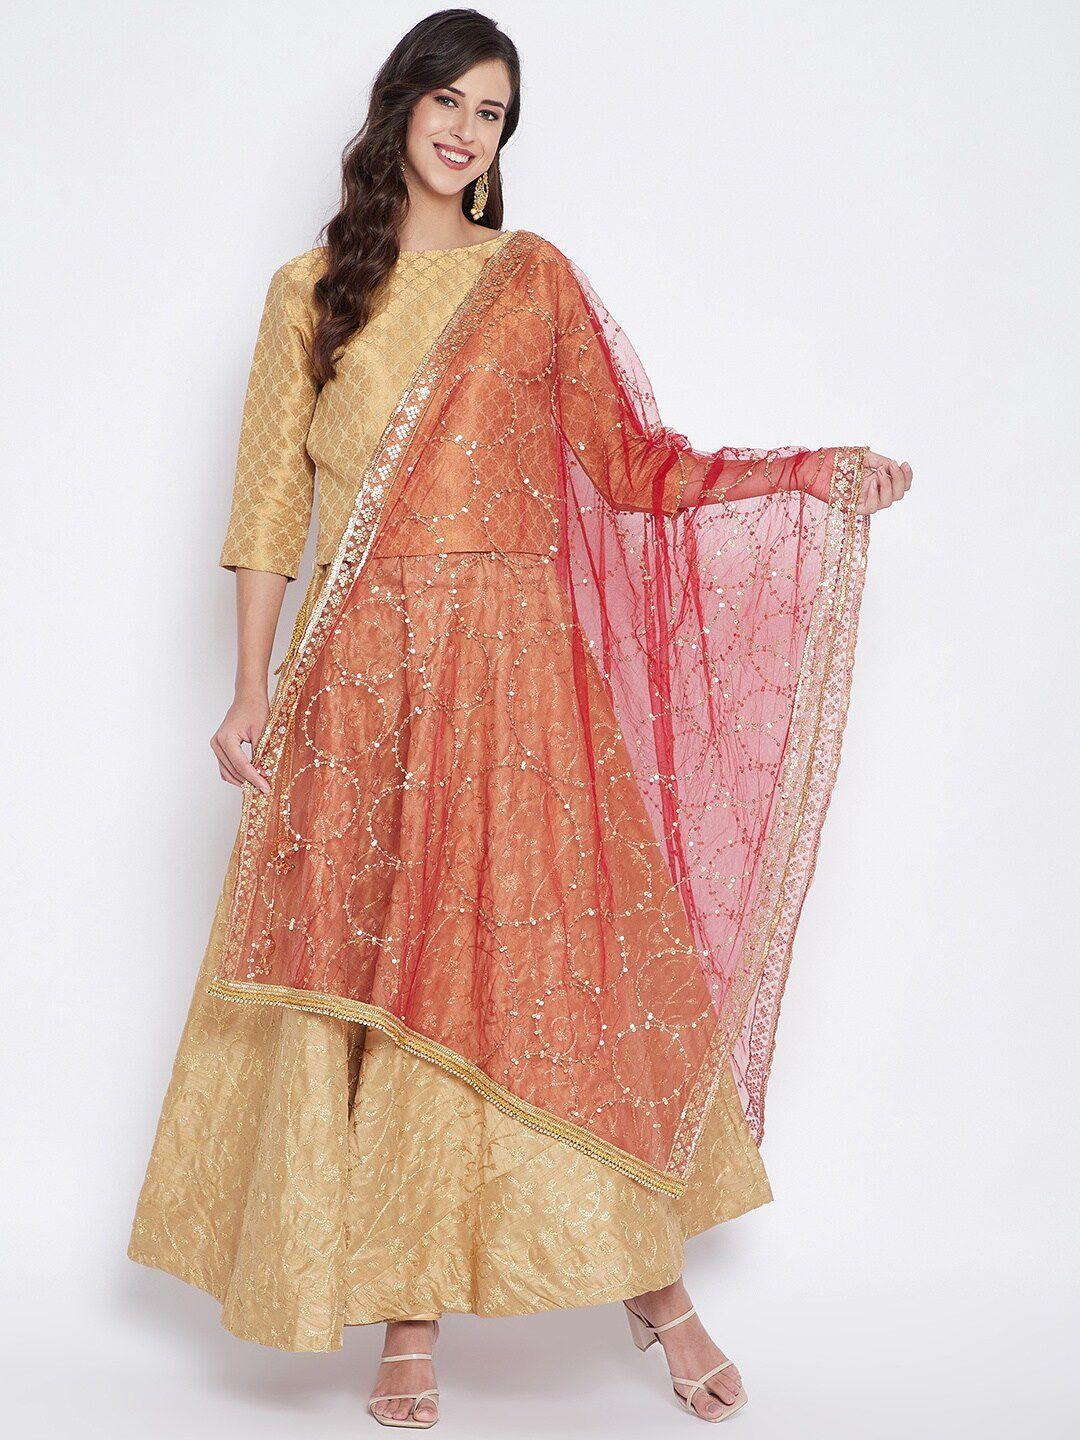 clora-creation-maroon-&-gold-toned-geometric-embroidered-dupatta-with-sequinned